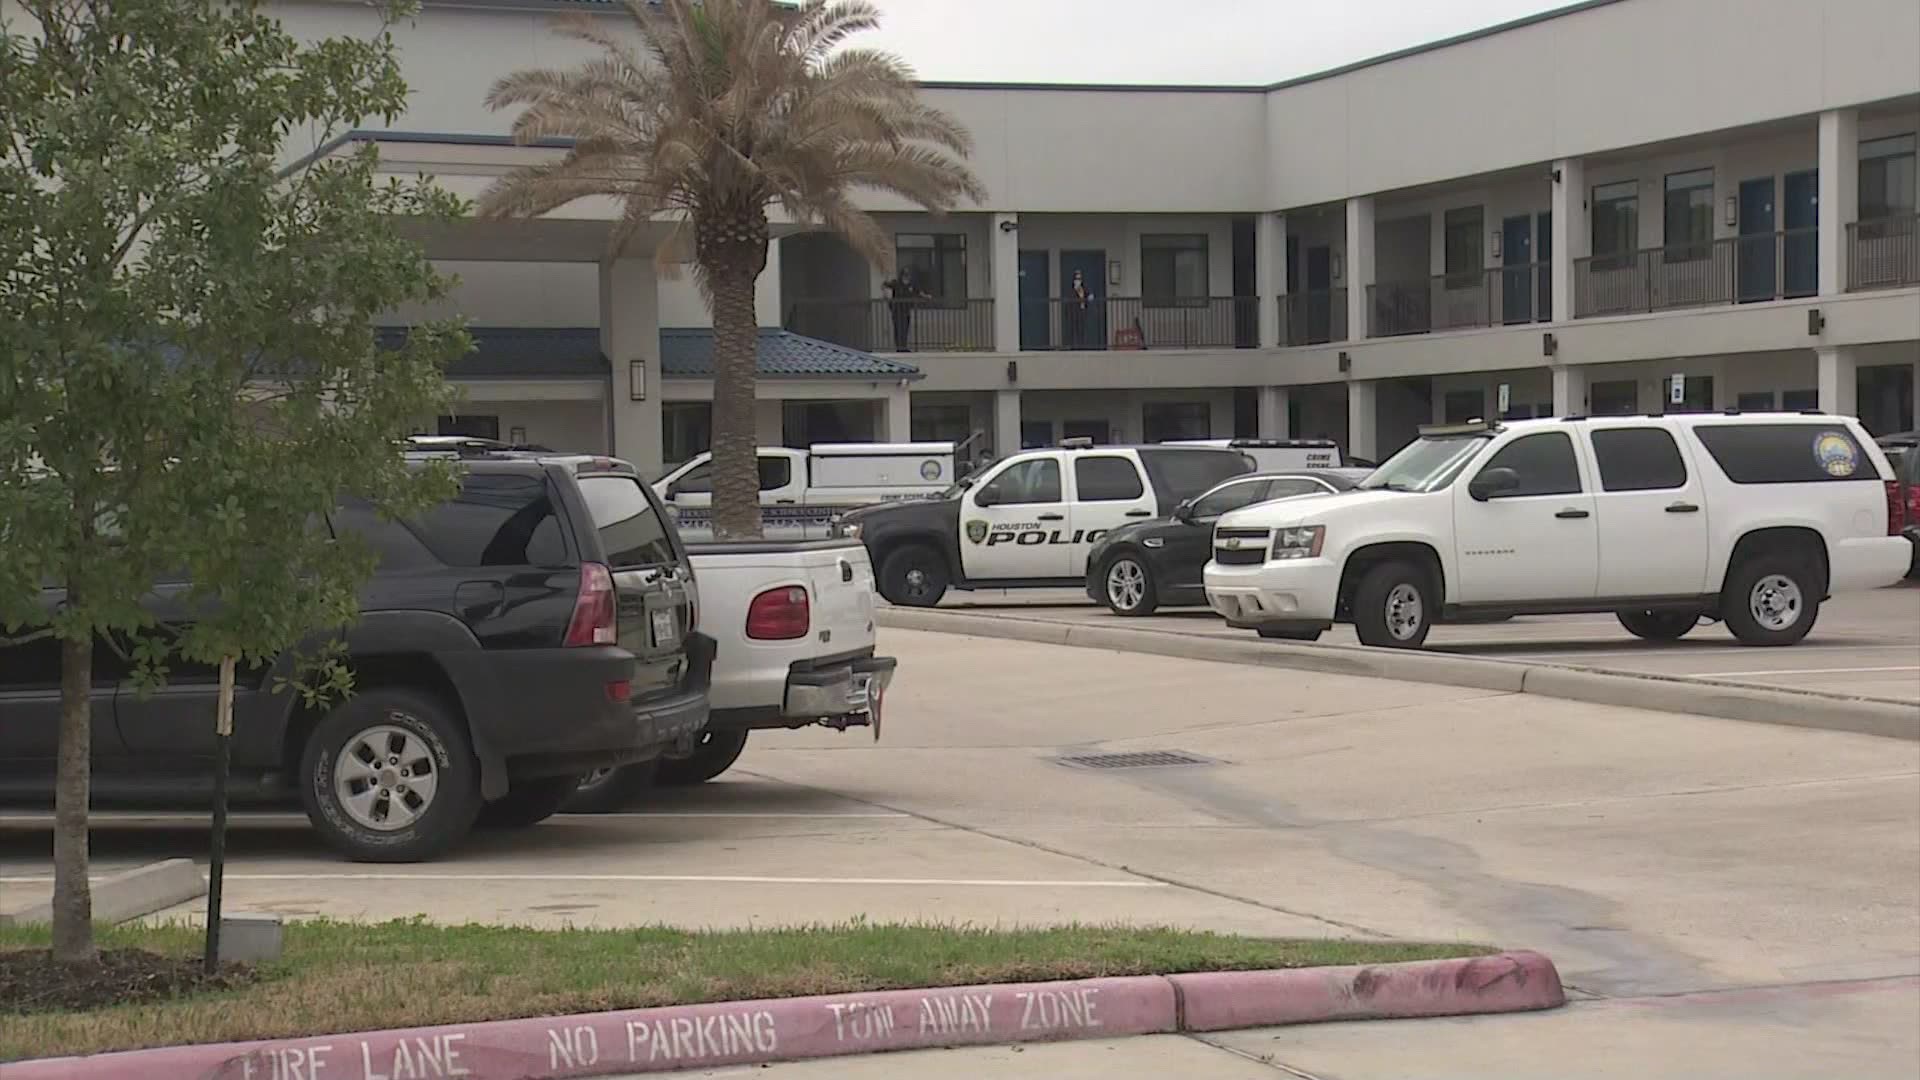 Houston homicide detectives are investigating after they said a man's body was found decapitated with several limbs missing inside a hotel room in southwest Houston.